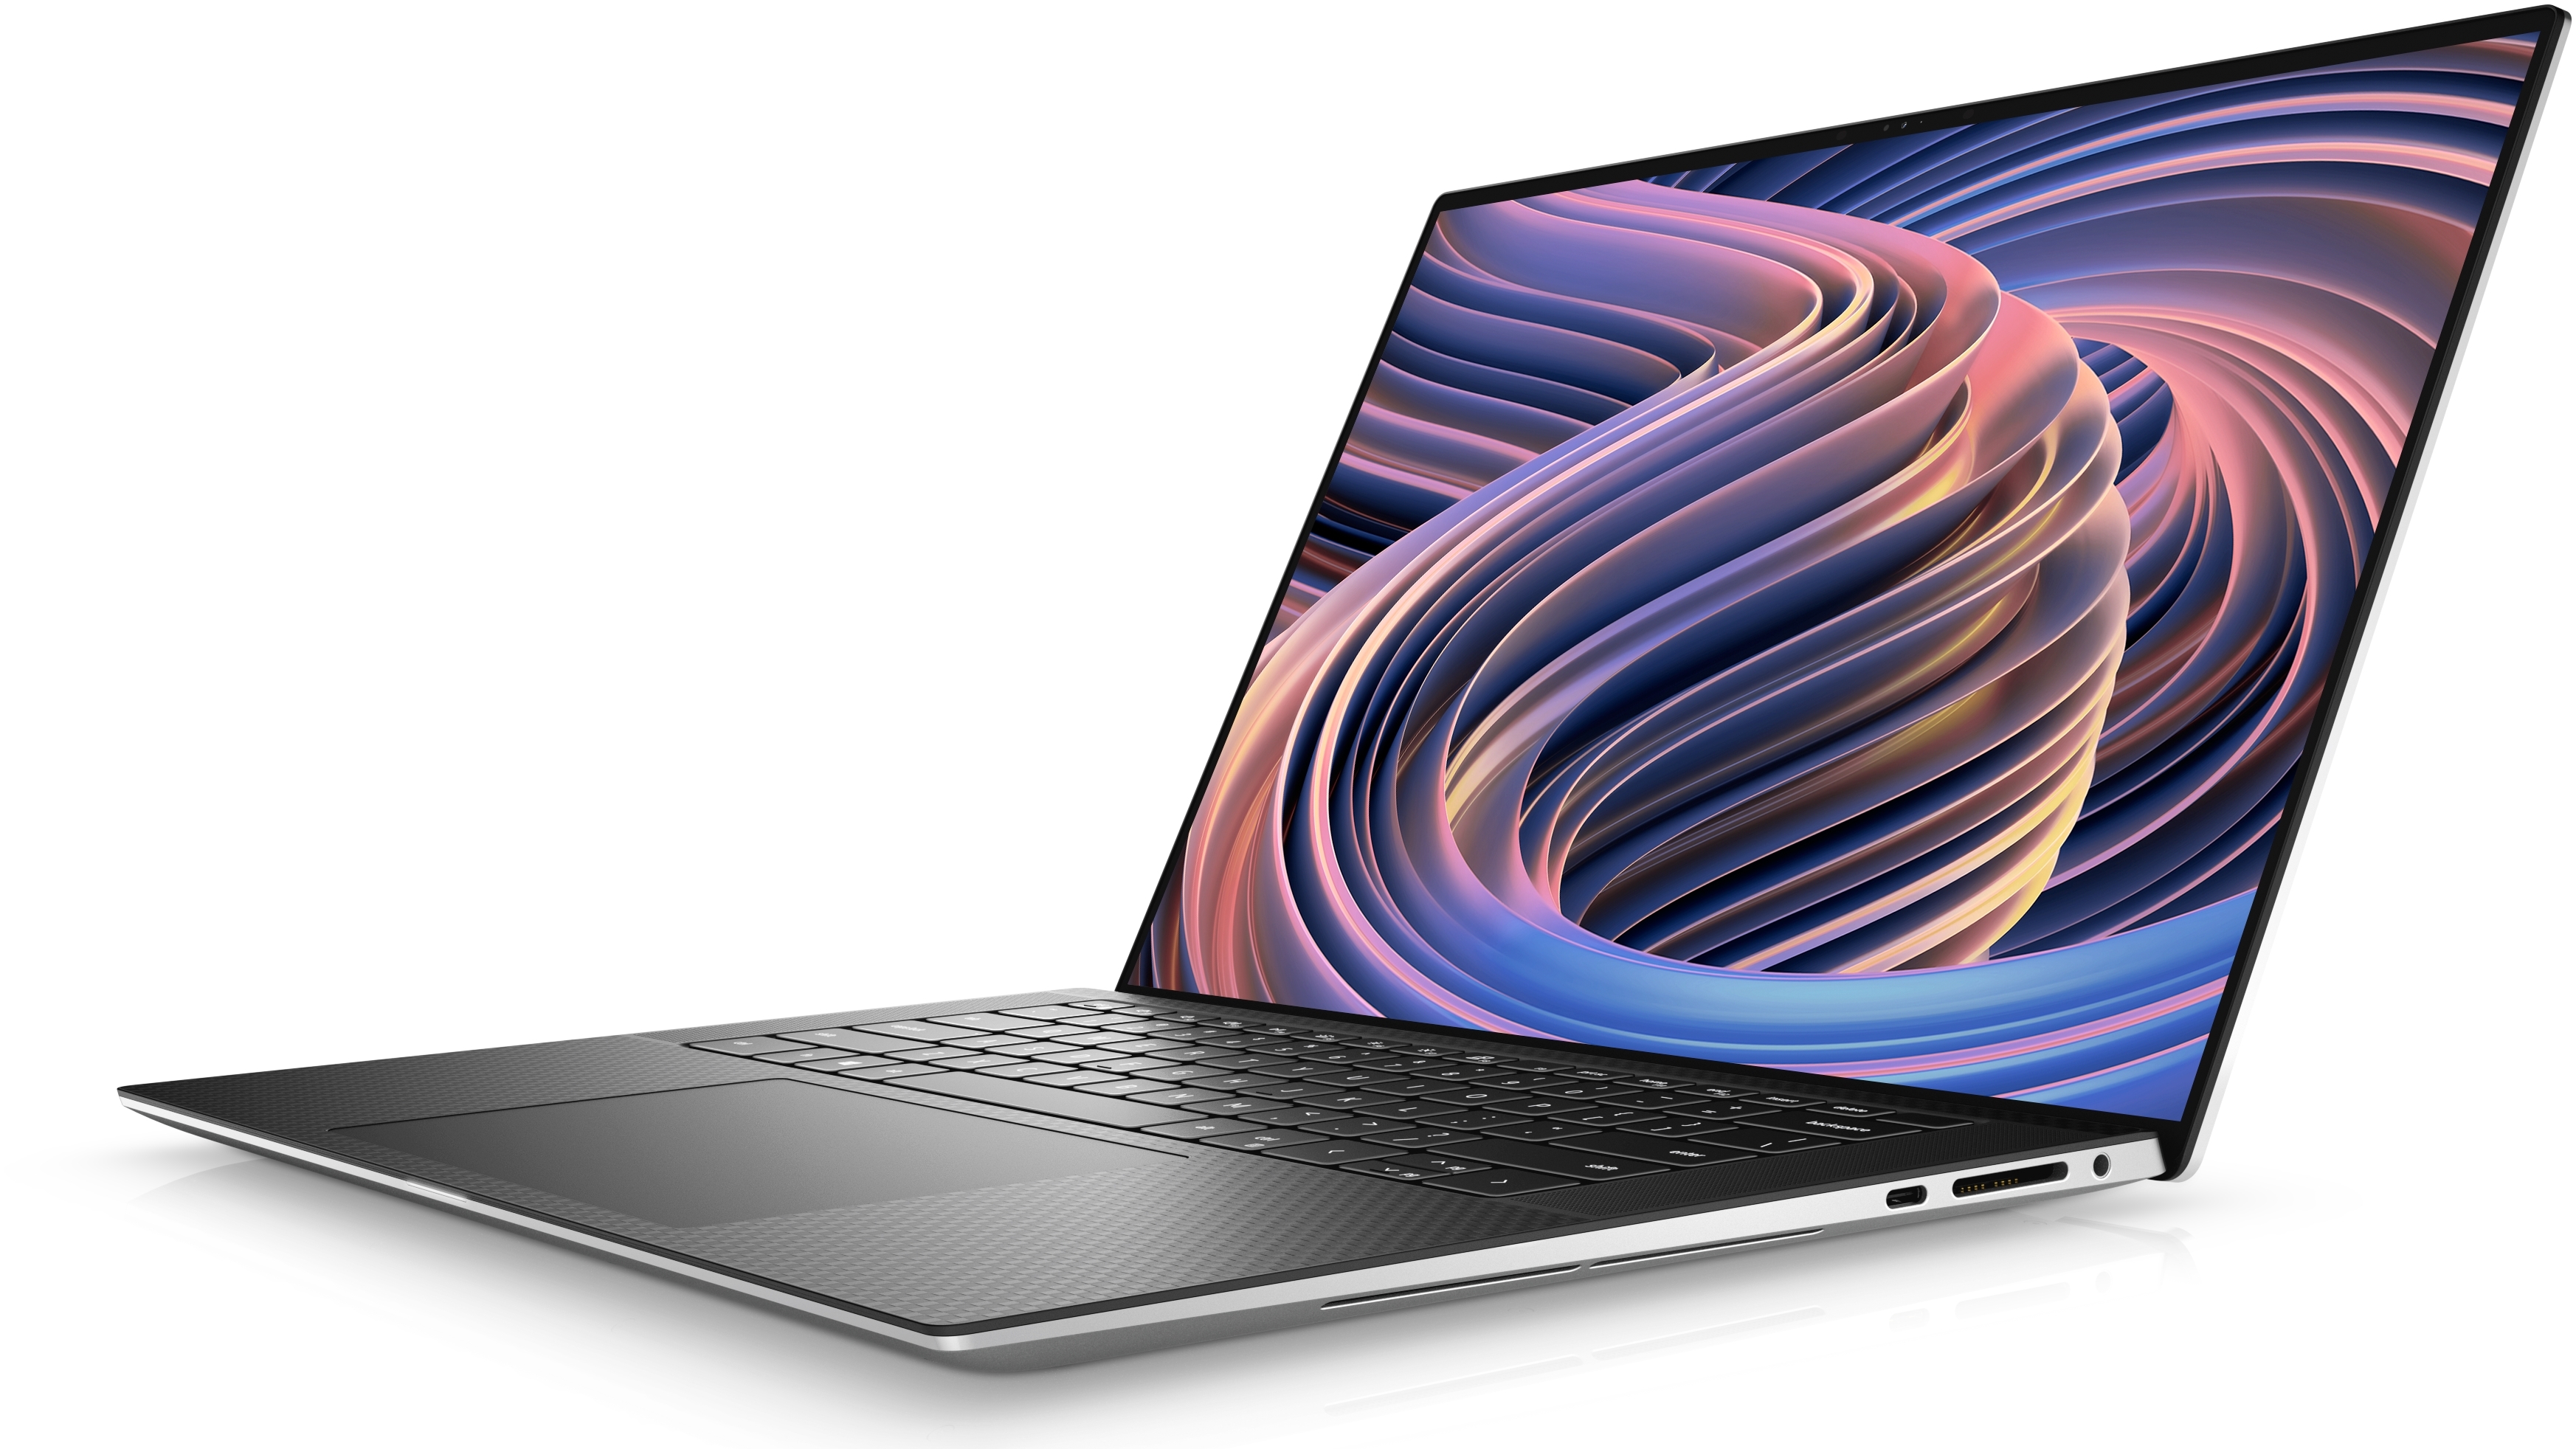 The Dell XPS 15.